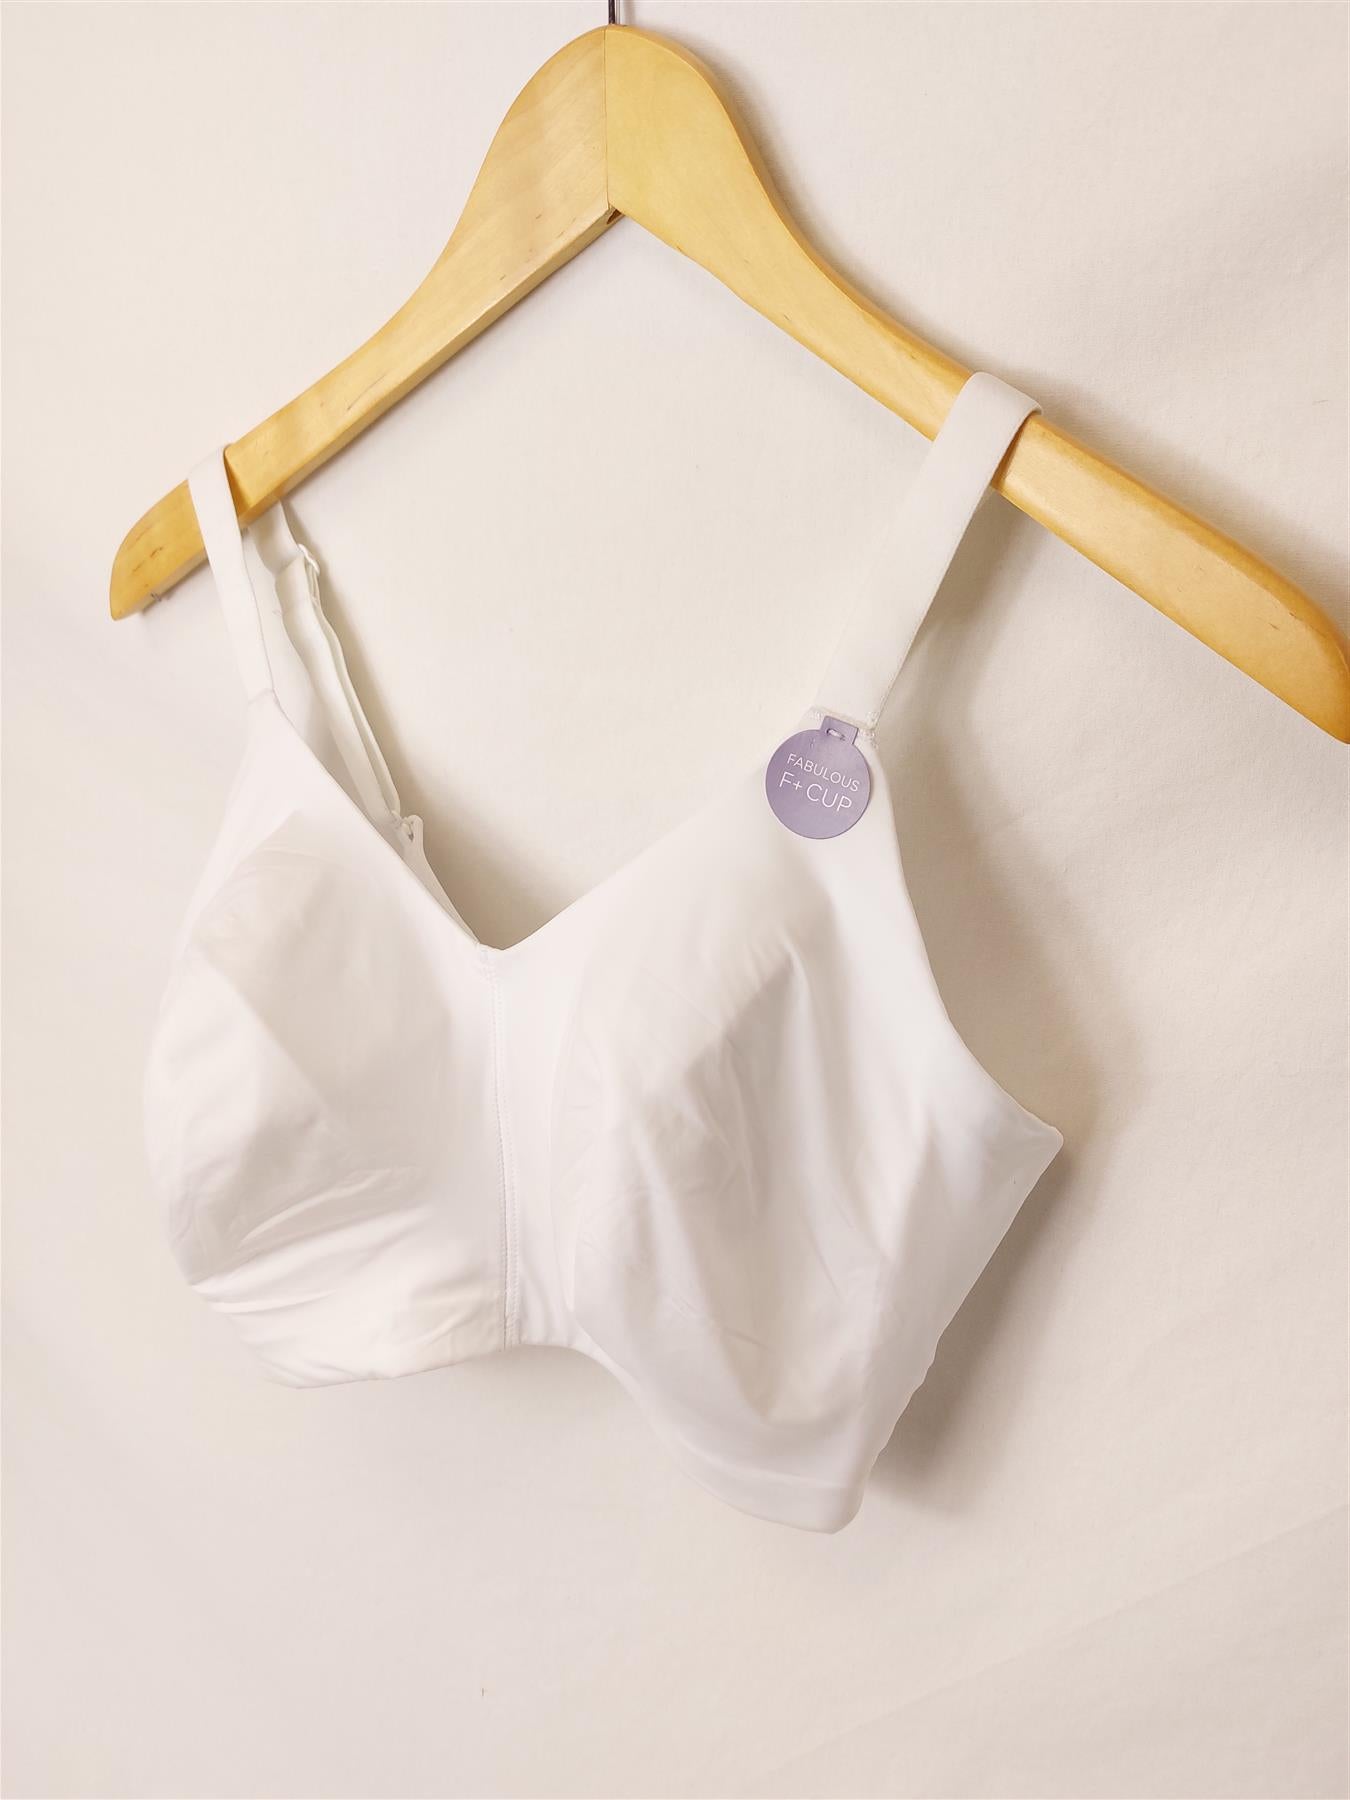 M&S Flexifit Bra Full Cup Non-Wired Comfort 34-42 F-H Plus Size White 3211